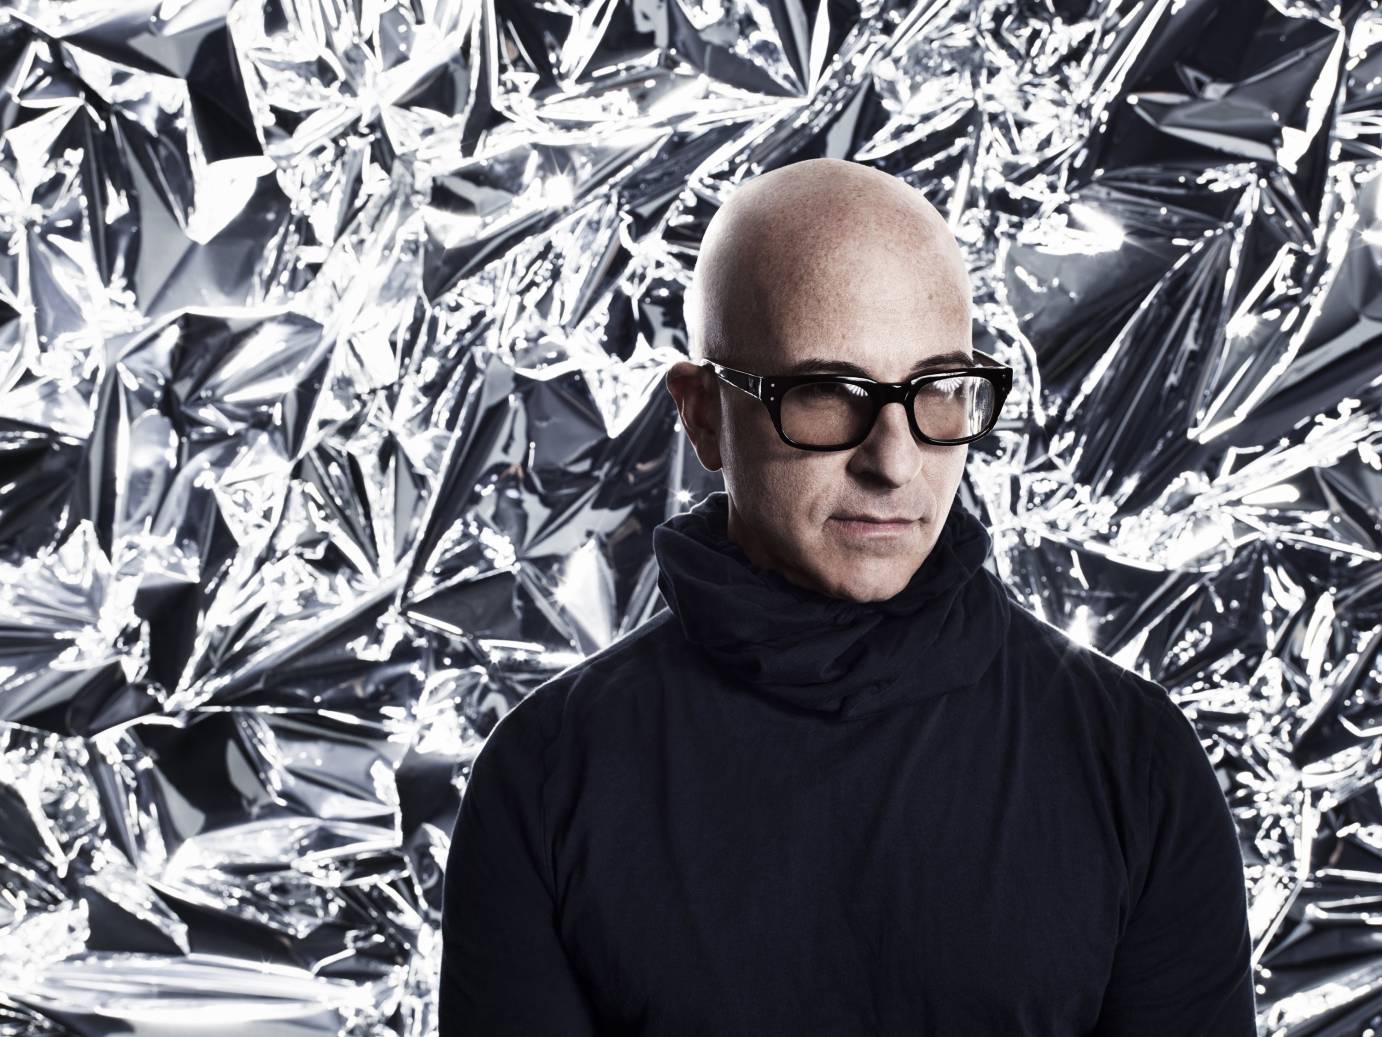 stephen petronio headshot  against a large crinkled aluminium-foil like background. He is bald and wears dark glasses with a dark cableknit turtleneck sweater... he looks down.